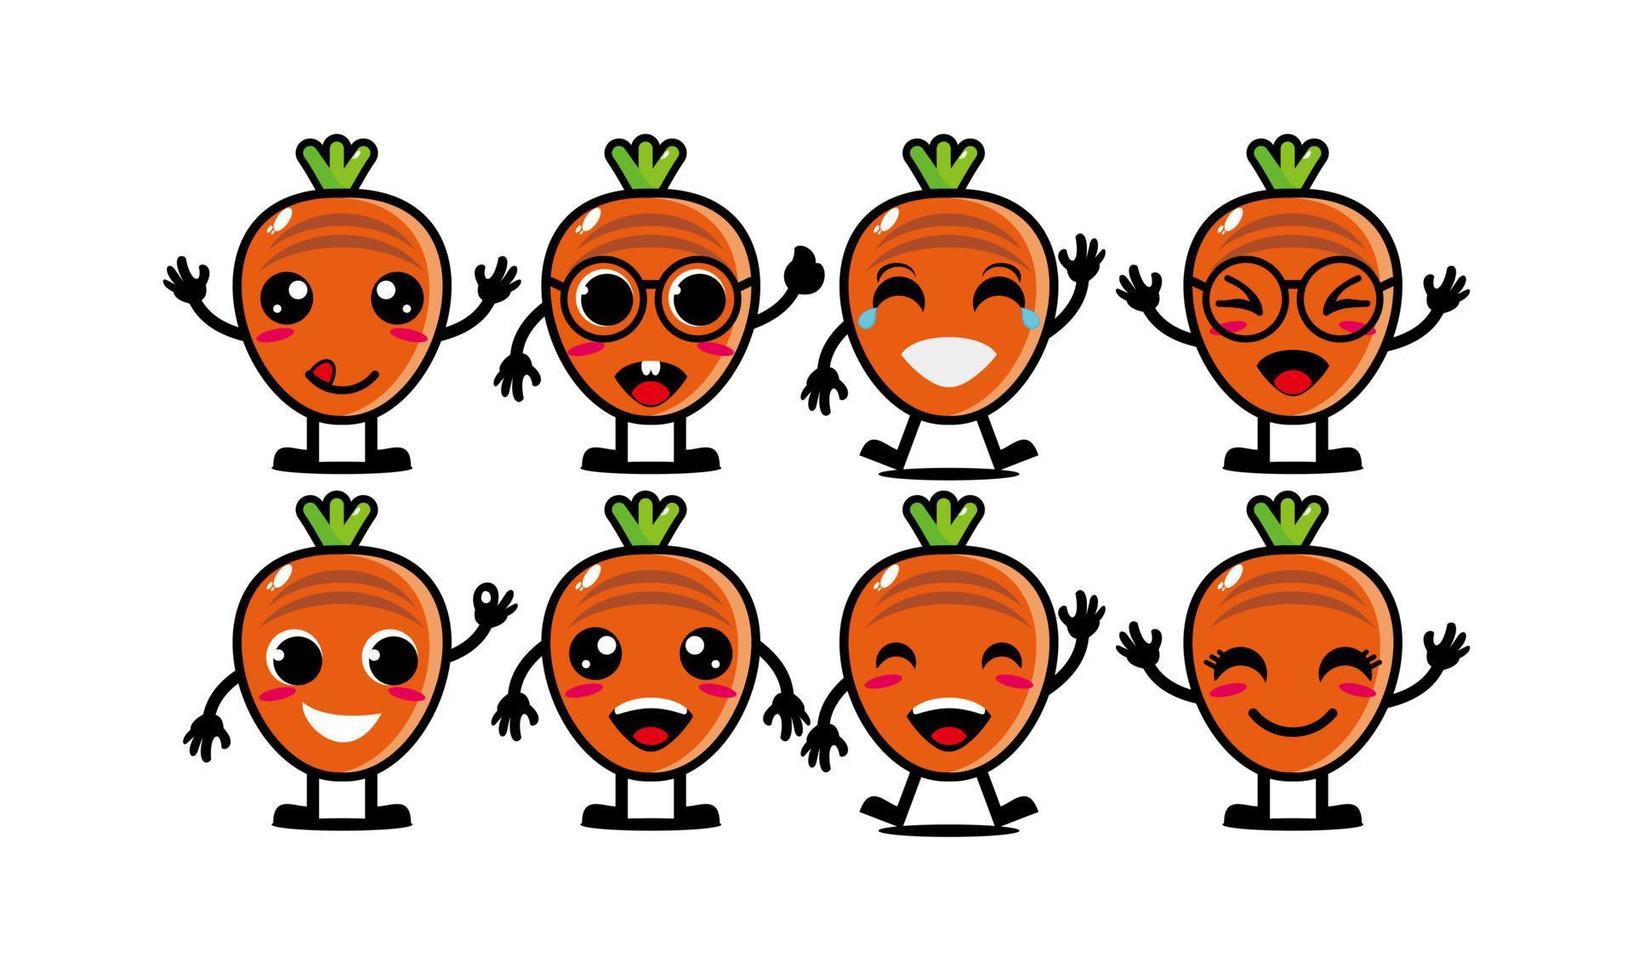 Cute smiling funny carrot vegetable set collection.Vector flat cartoon face character mascot illustration .Isolated on white background vector